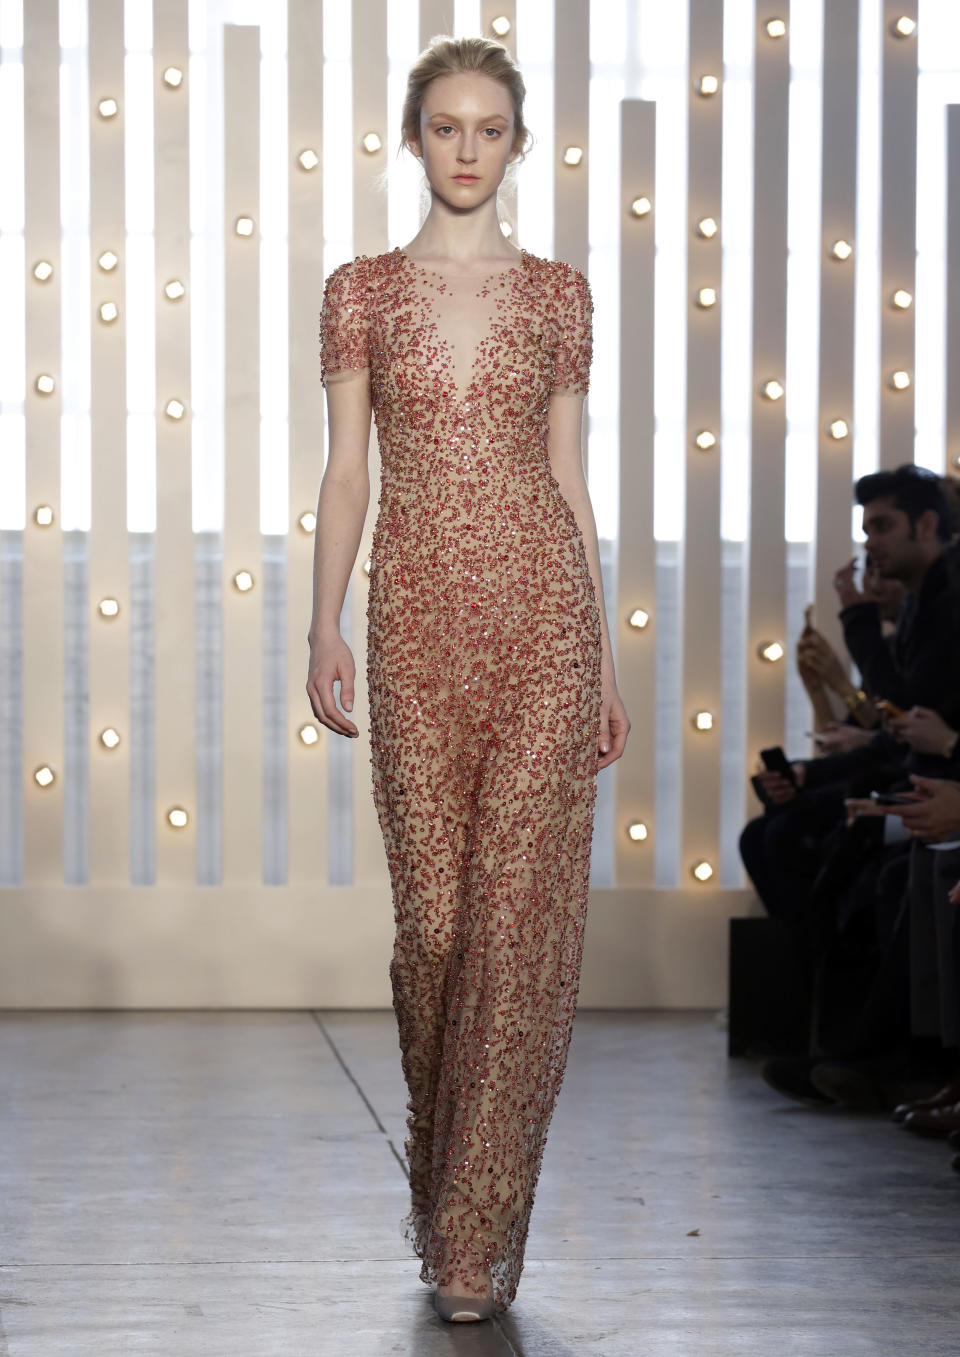 The Jenny Packham Fall 2014 collection is modeled during Fashion Week in New York, Tuesday, Feb. 11, 2014. (AP Photo/Richard Drew)